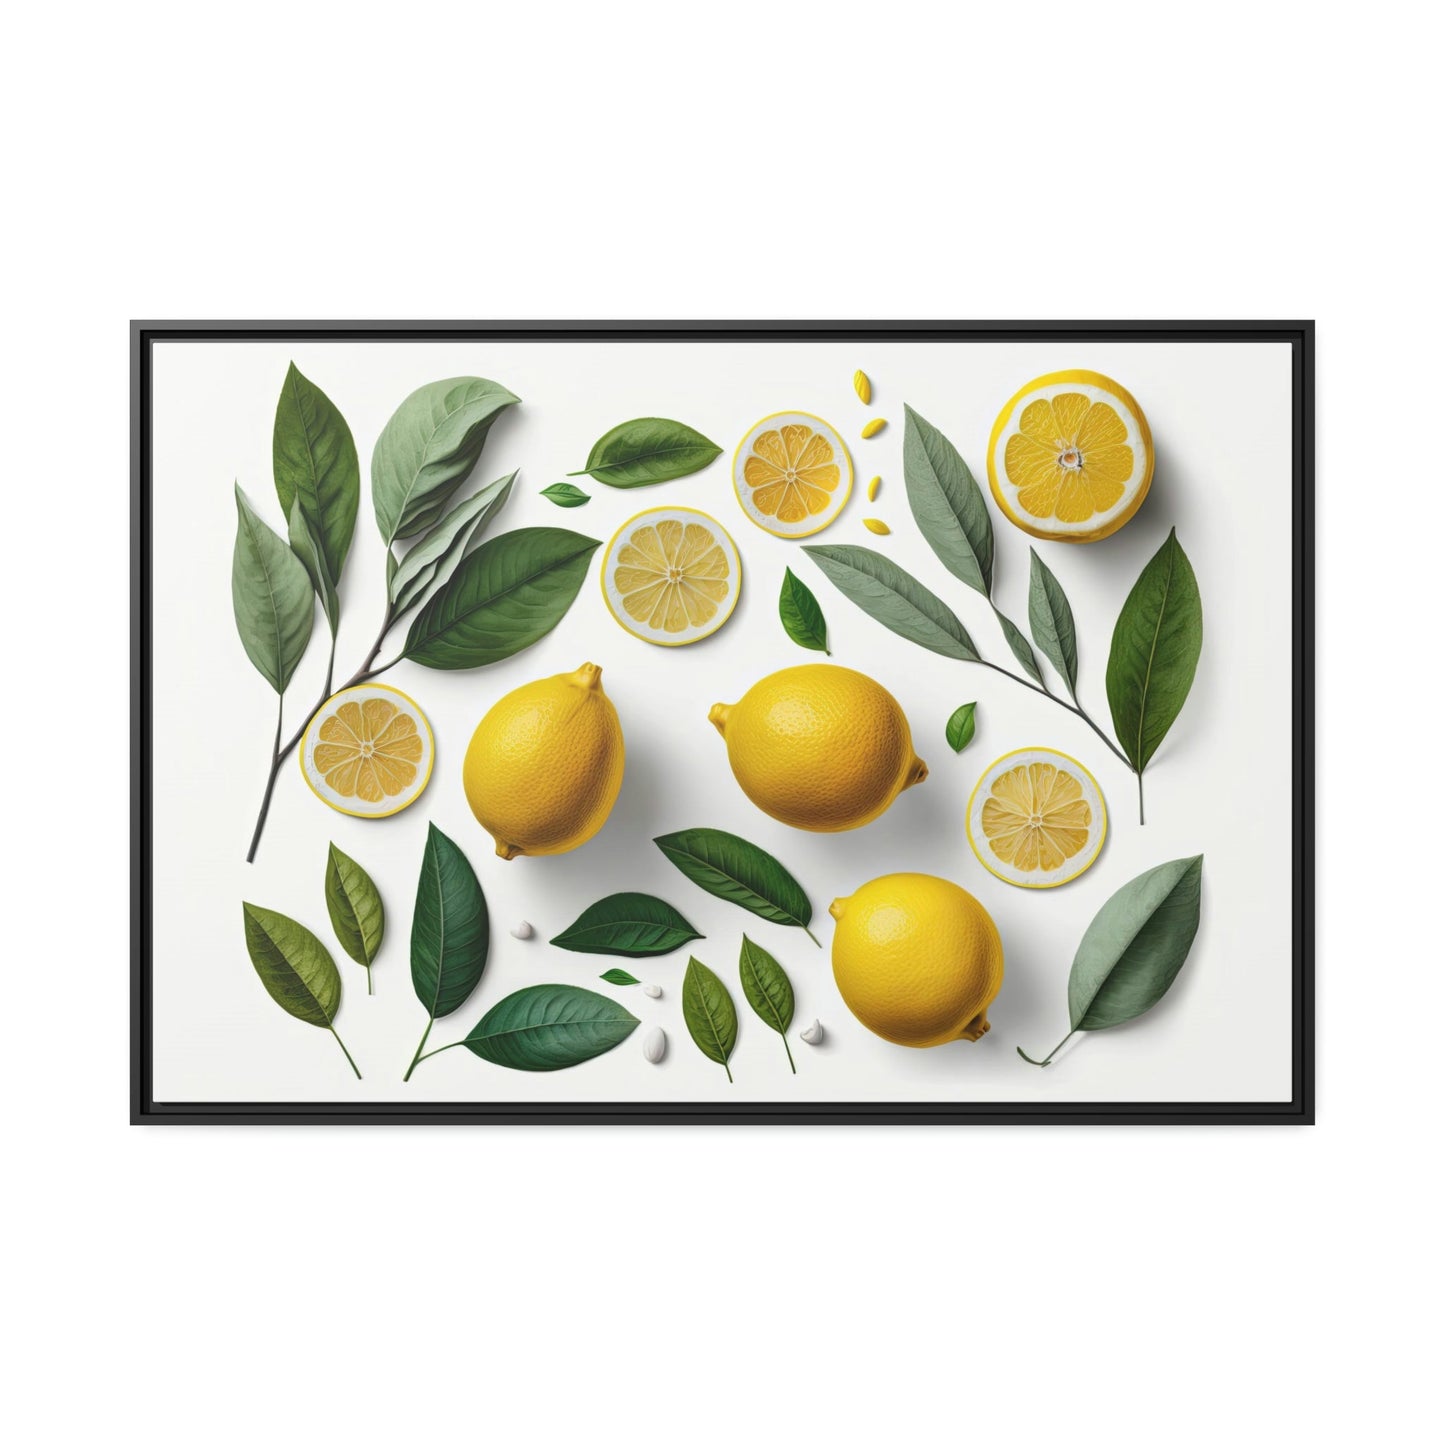 Refreshing and Invigorating Canvas Art Prints and Framed Posters Featuring Yellow Lemons